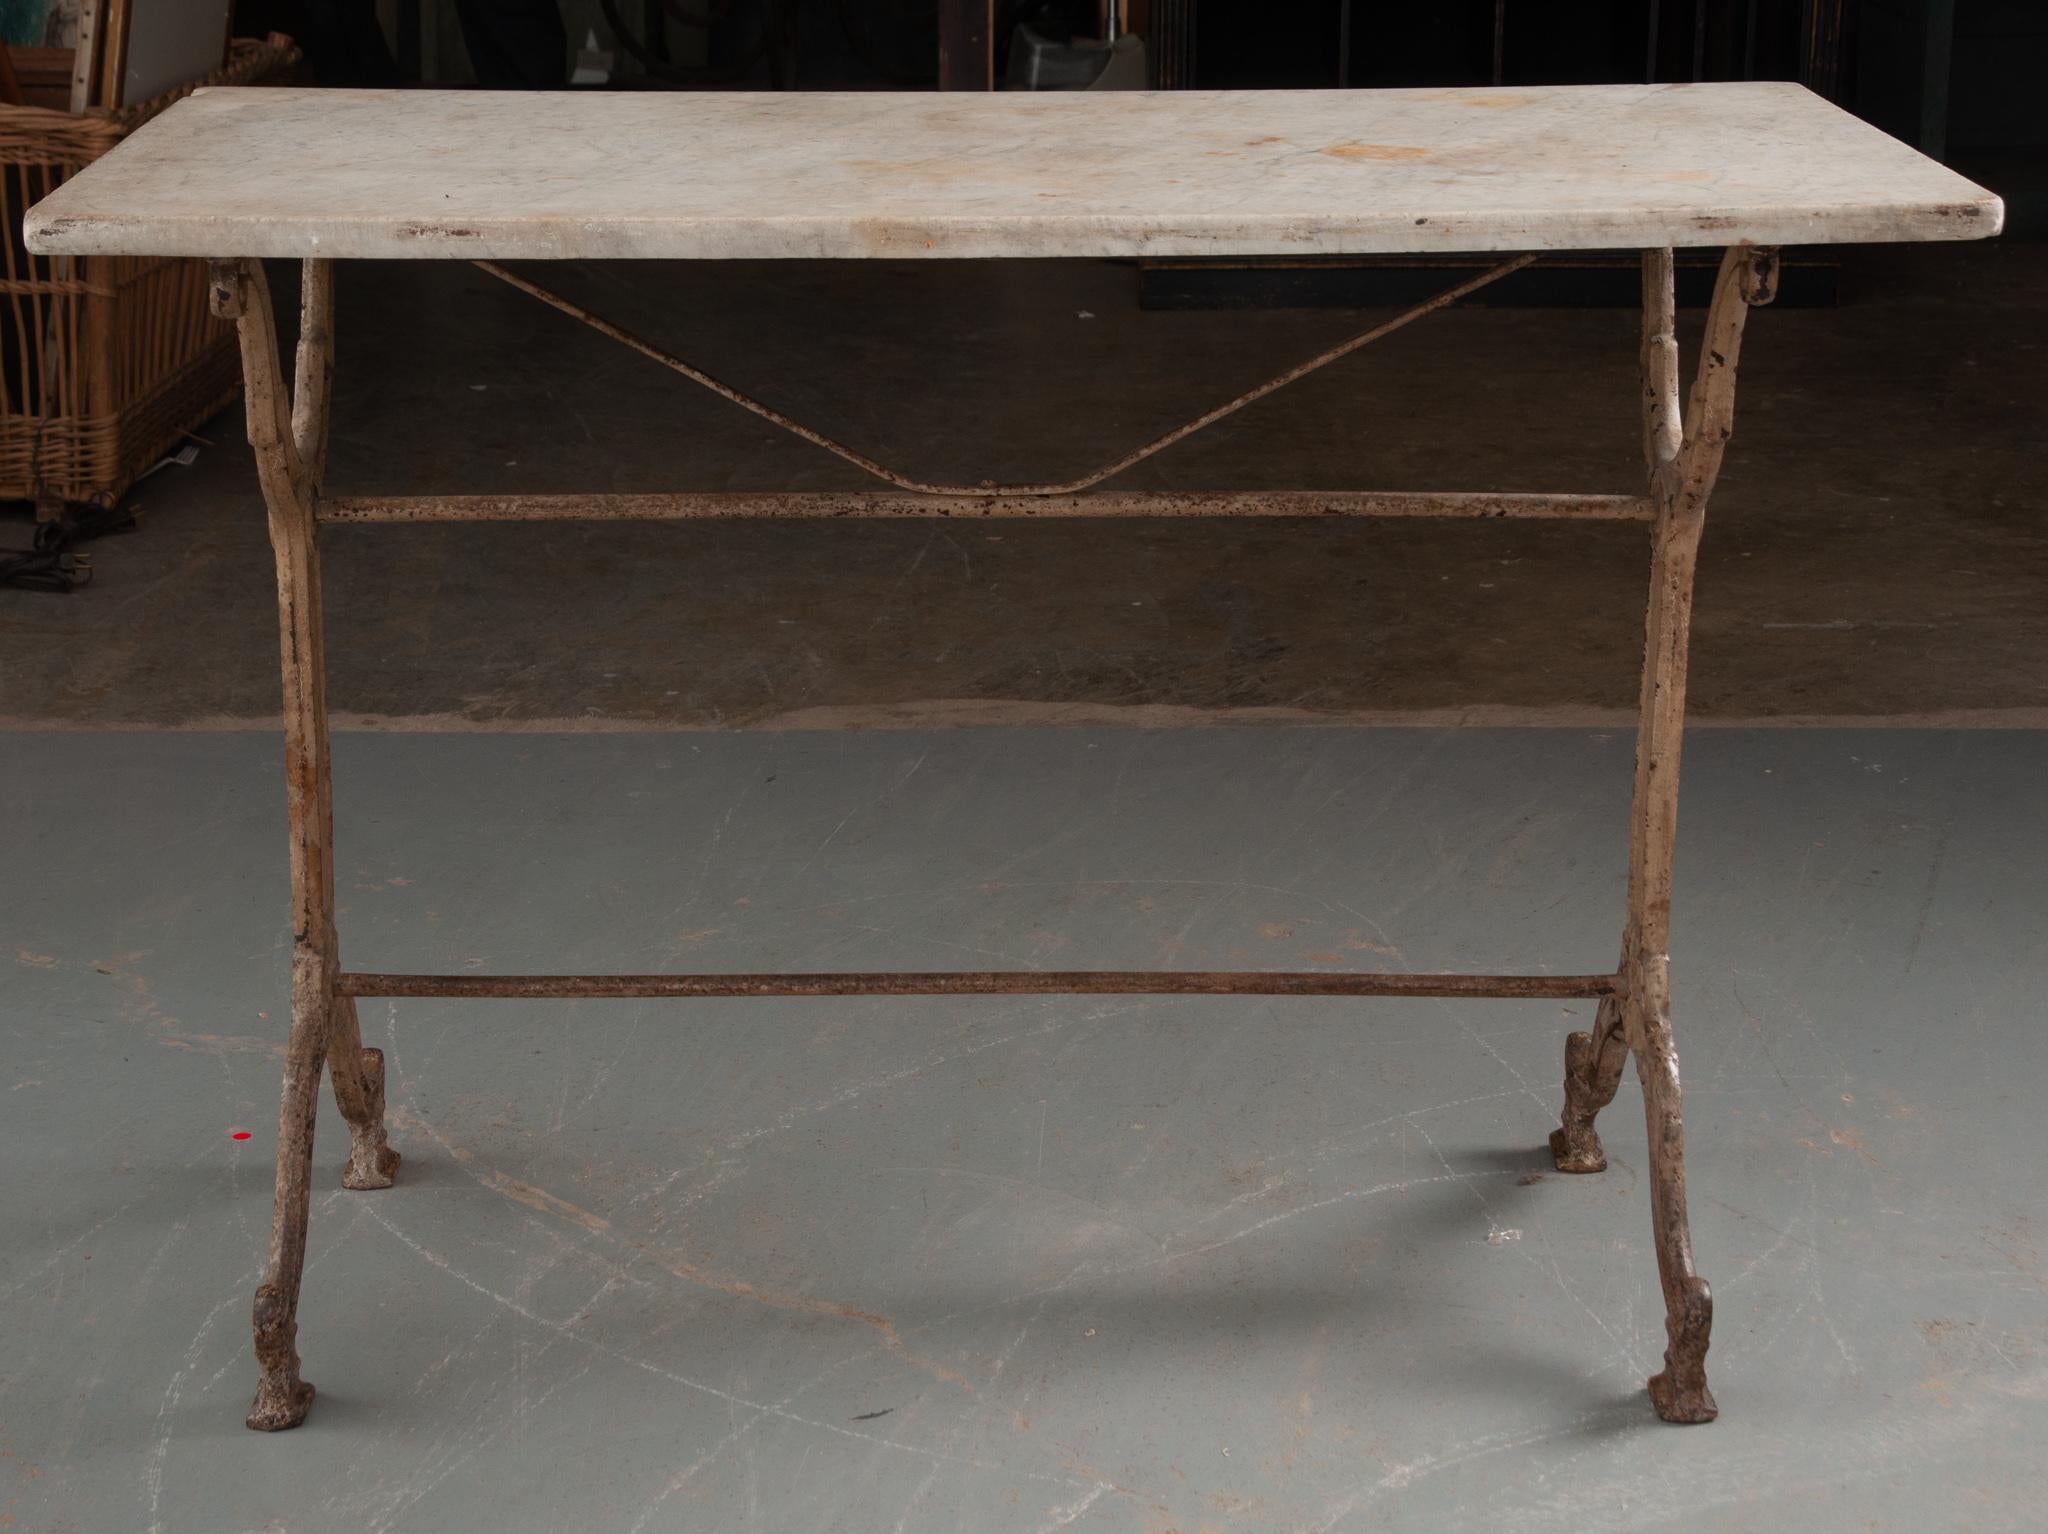 This amazing marble top garden table was made in France. The white marble top is in antique condition, with gray veins and softened corners. The cast iron base is classically styled, with fashioned upright supports, linked by two iron stretcher